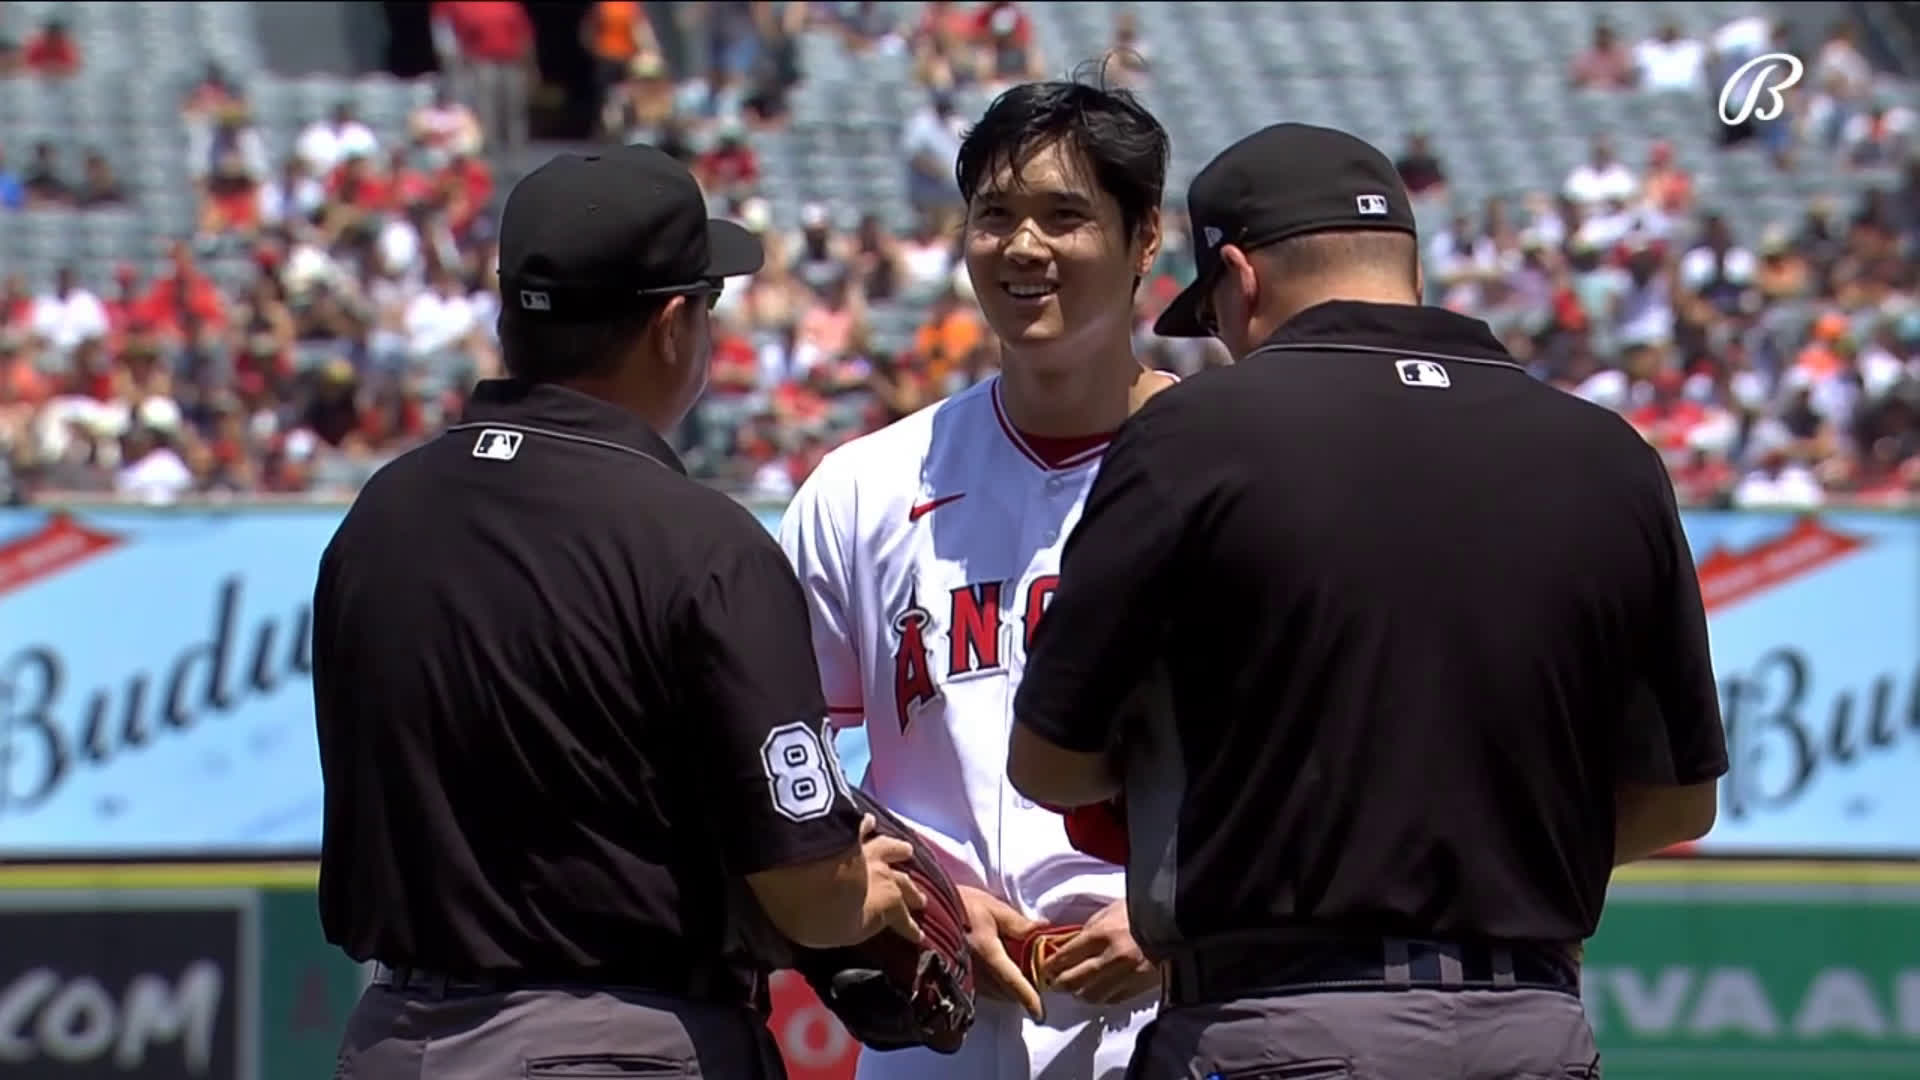 Shohei Ohtani unbuckles his pants in the middle of a baseball game r/ baseball